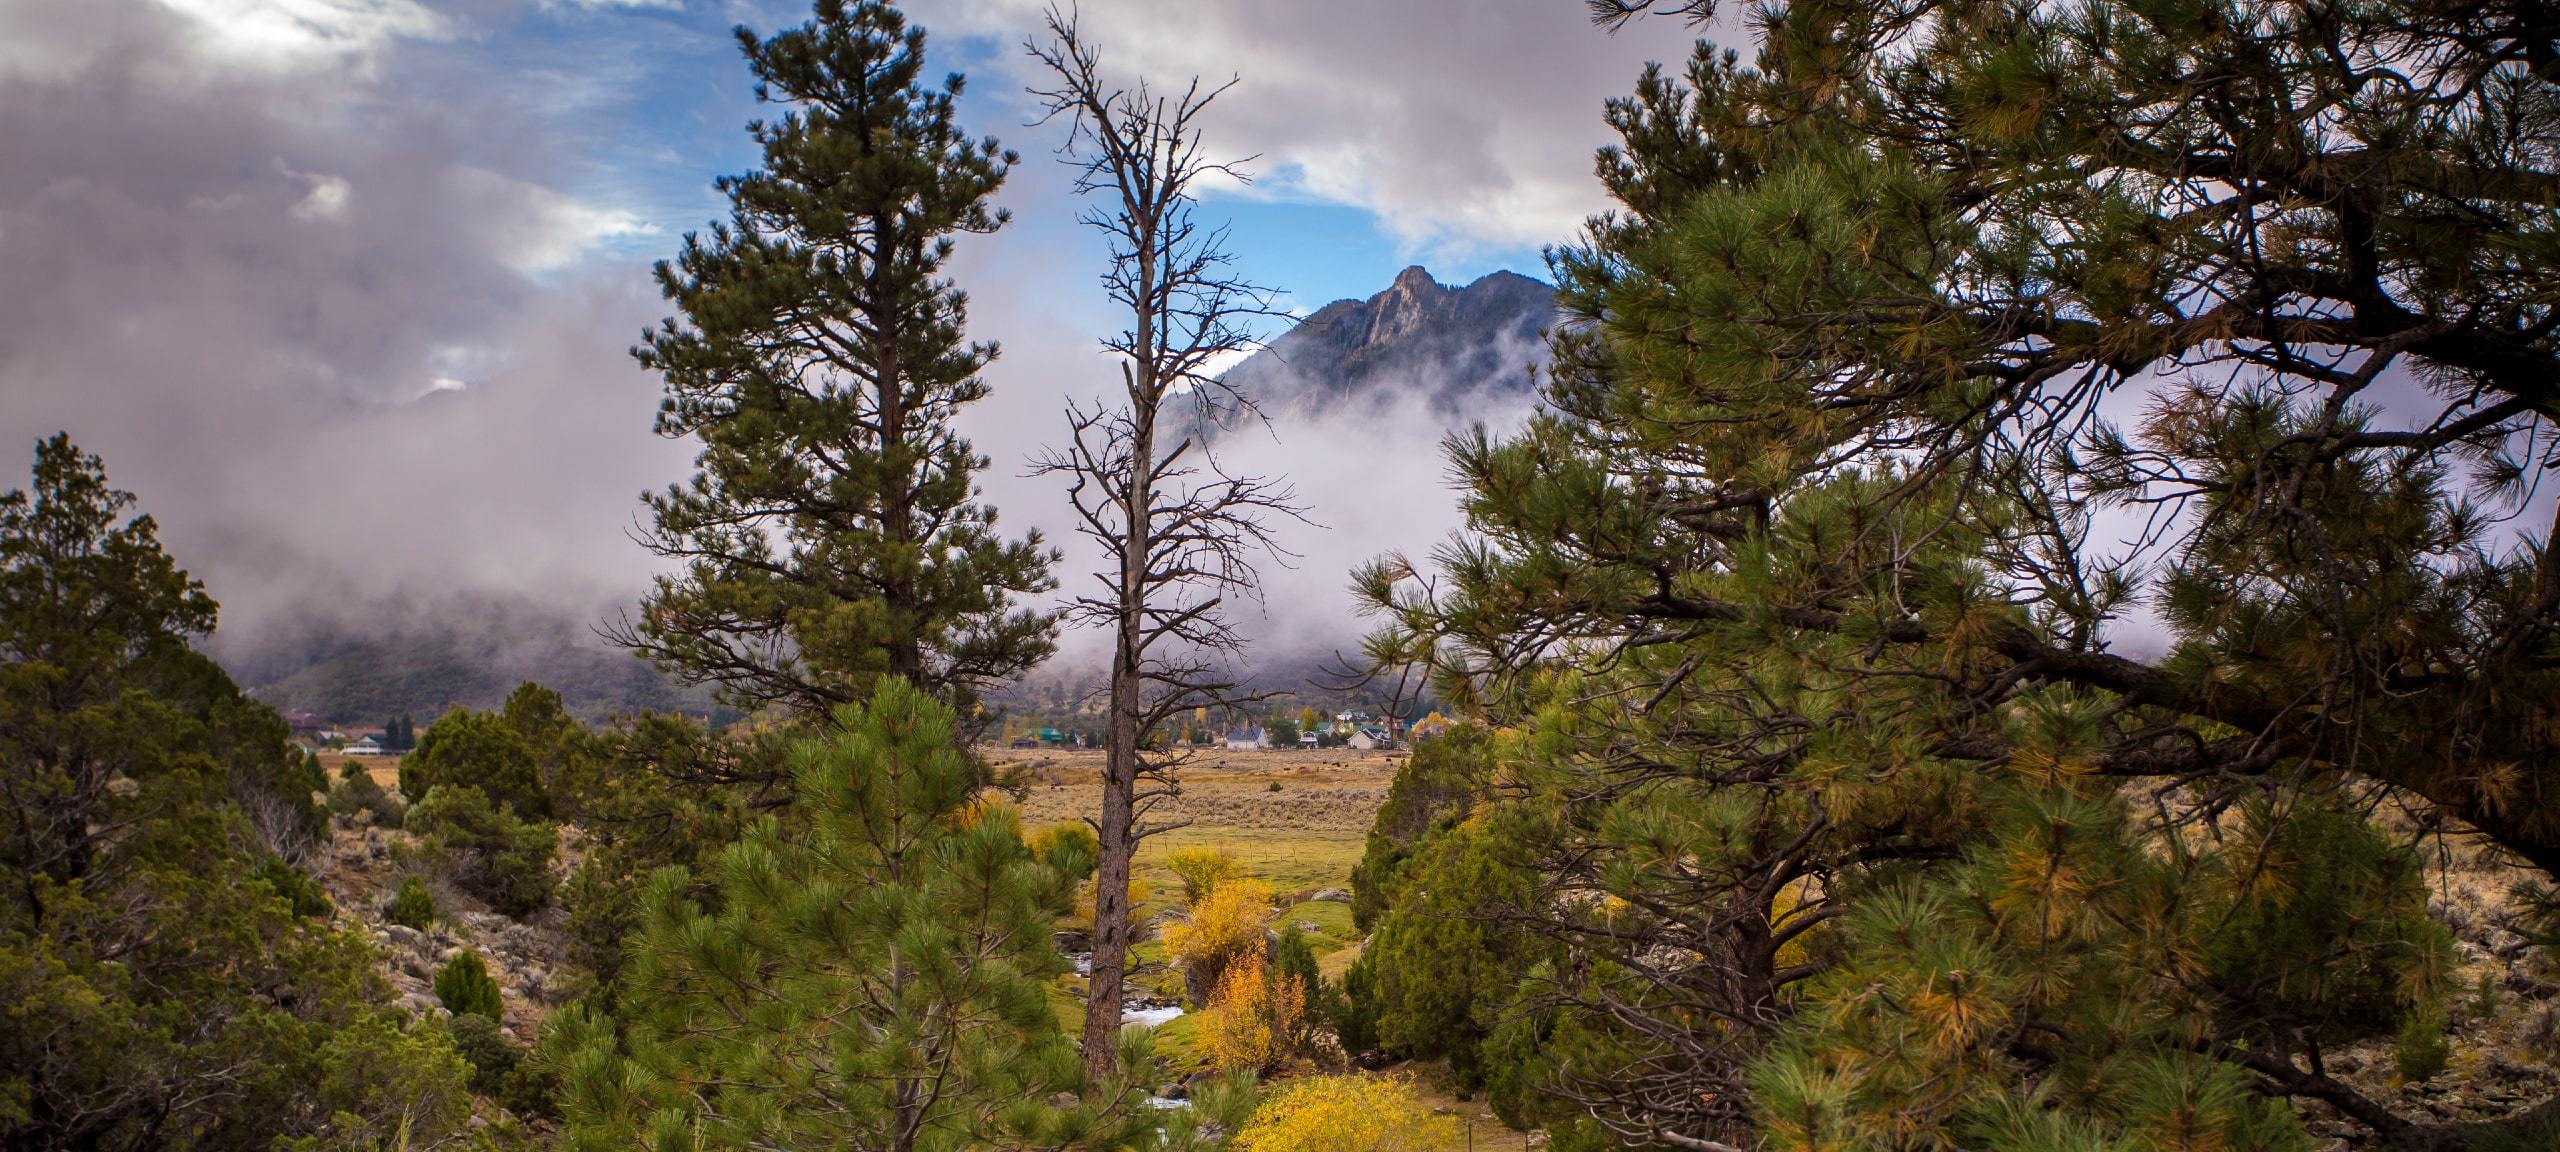 View of trees and mountains in Pine Valley, Utah